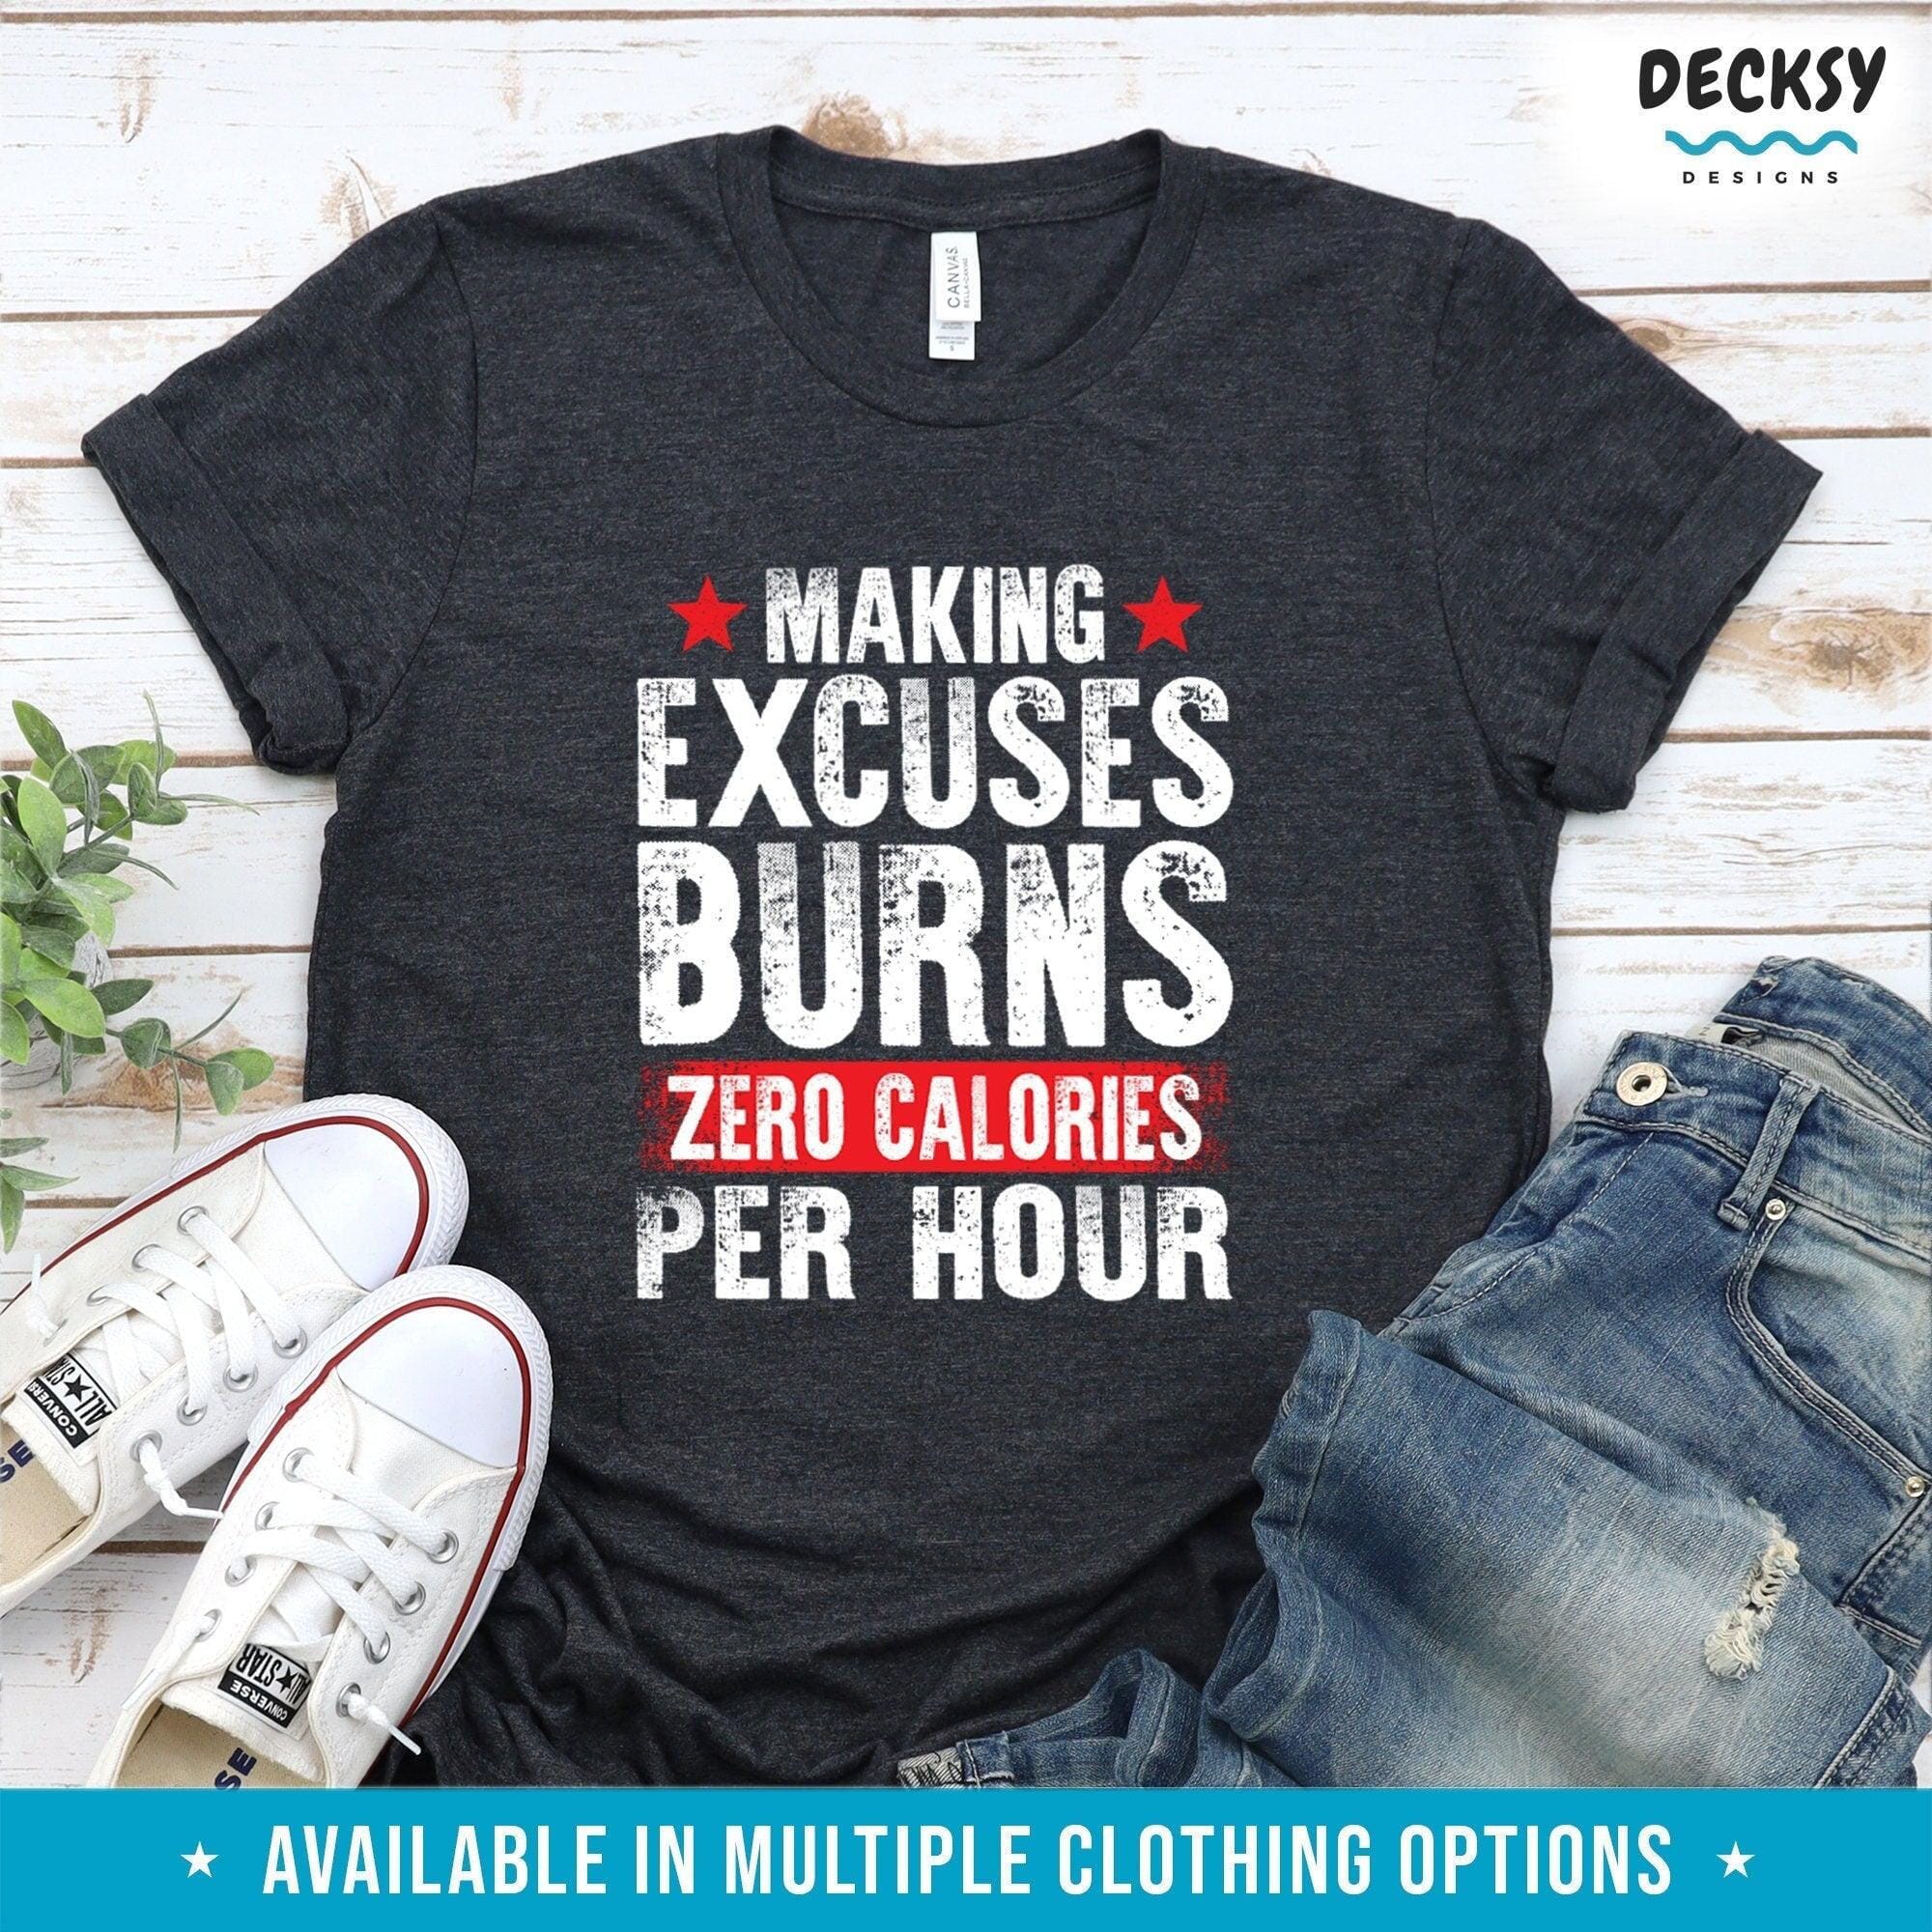 Exercising Tshirt, Workout Buddy Gift-Clothing:Gender-Neutral Adult Clothing:Tops & Tees:T-shirts:Graphic Tees-DecksyDesigns